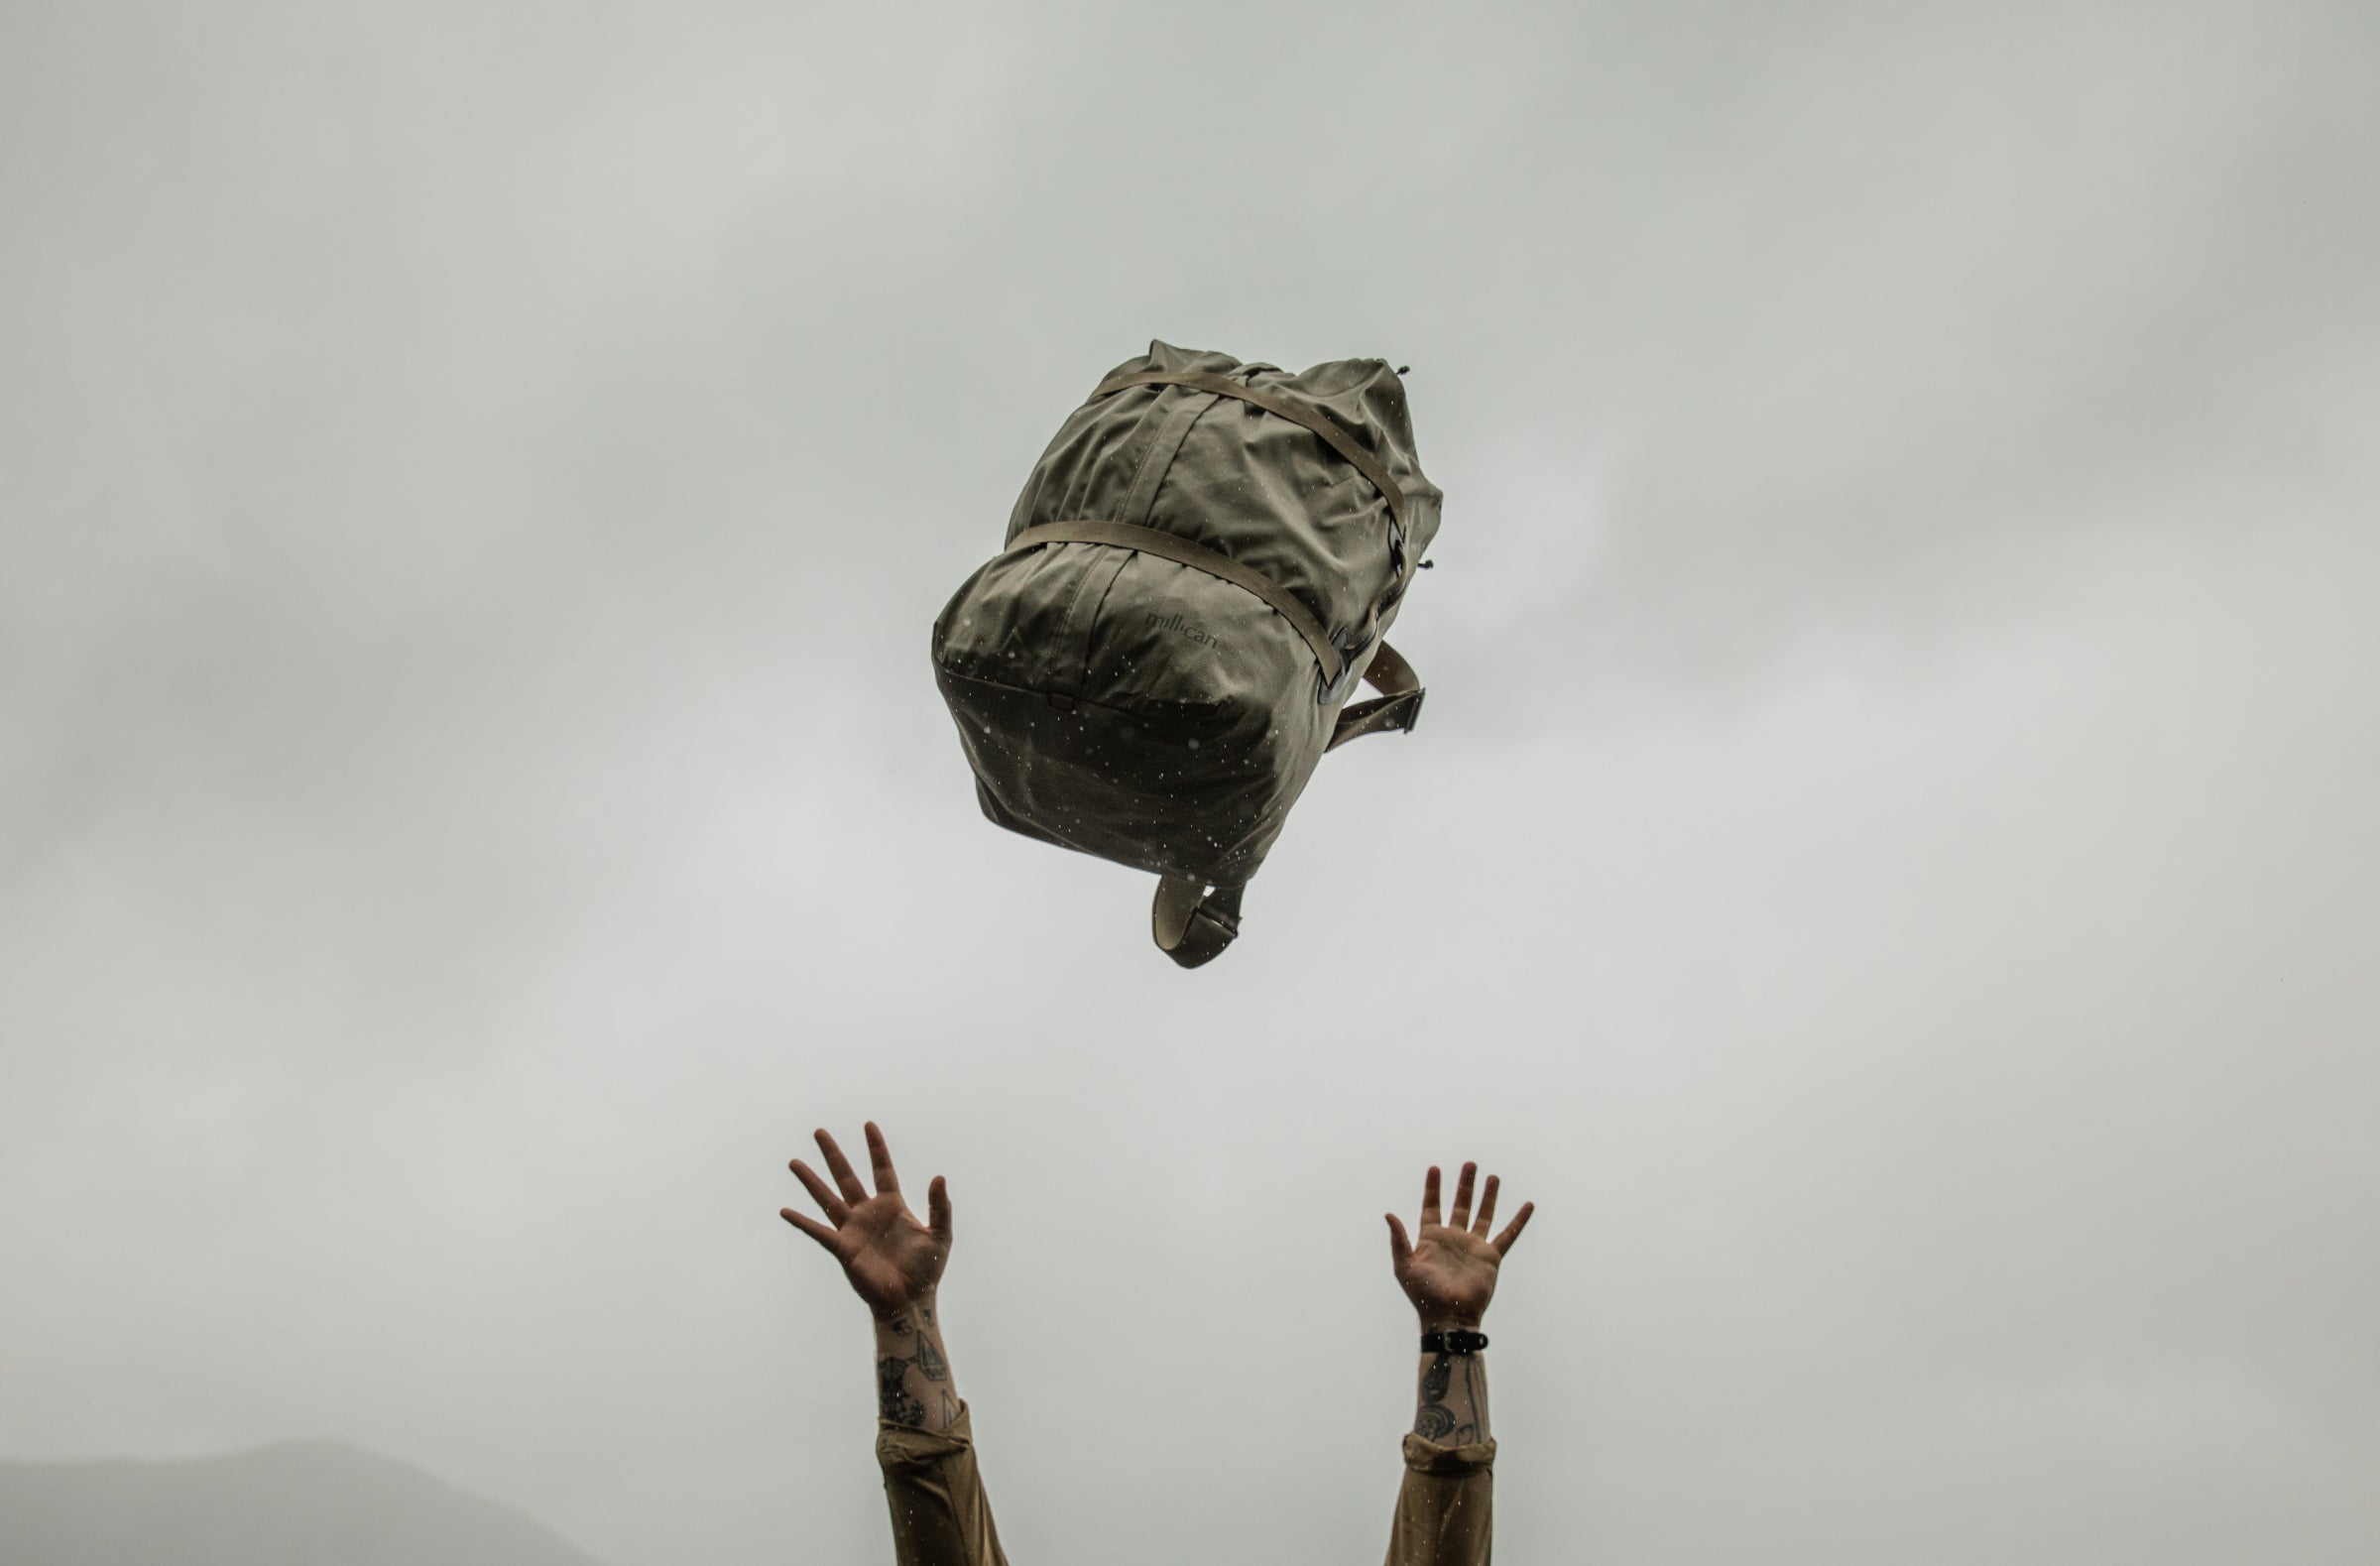 A Millican Miles 40L duffle bag is captured mid-air against a grey sky, with a person's hands reaching up from the bottom of the frame